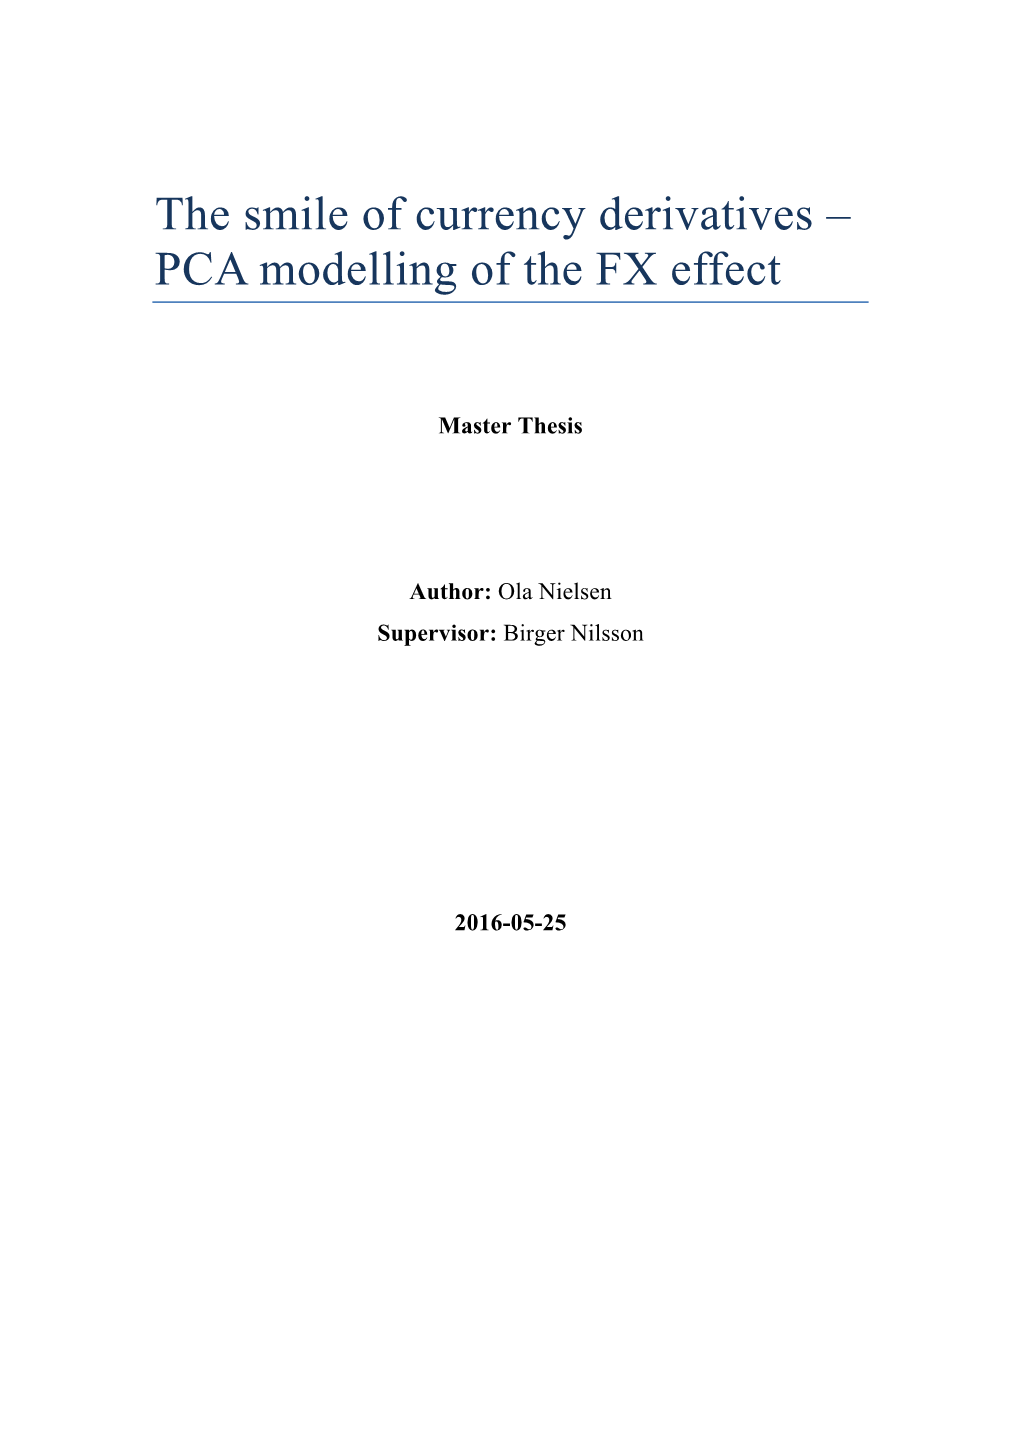 The Smile of Currency Derivatives – PCA Modelling of the FX Effect